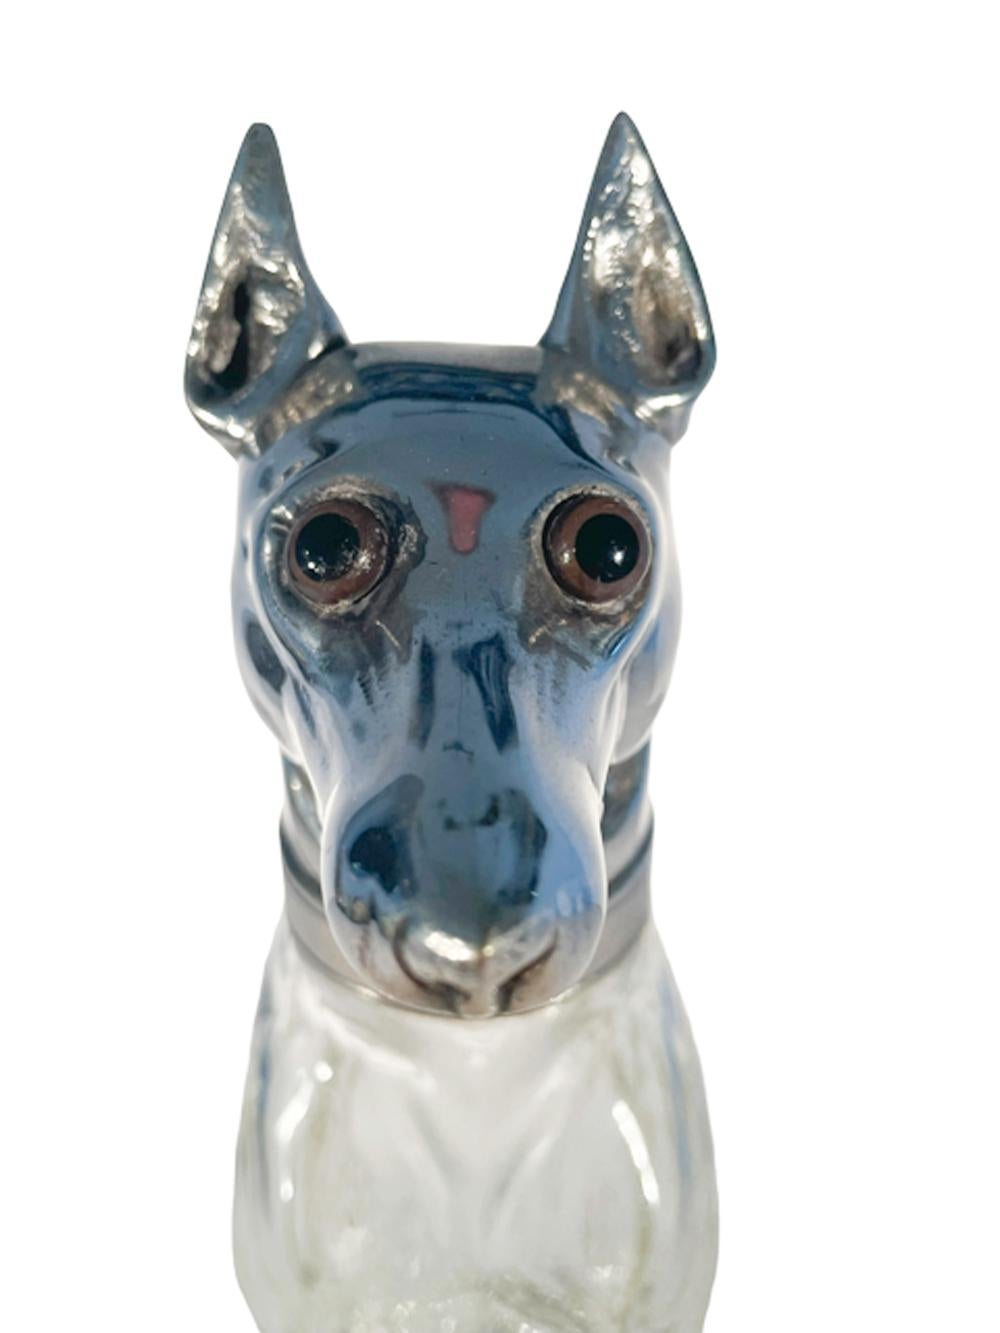 Art Deco Greyhound or Whippet Decanter Glass w/Silver Plate Head with Glass Eyes For Sale 2